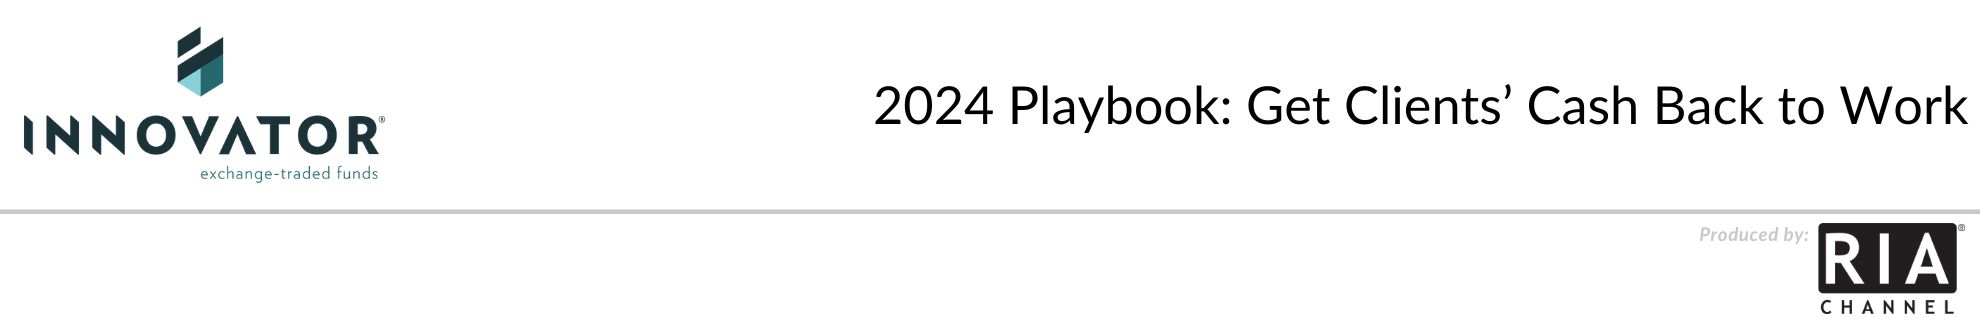 2024 Playbook: Get Clients’ Cash Back to Work